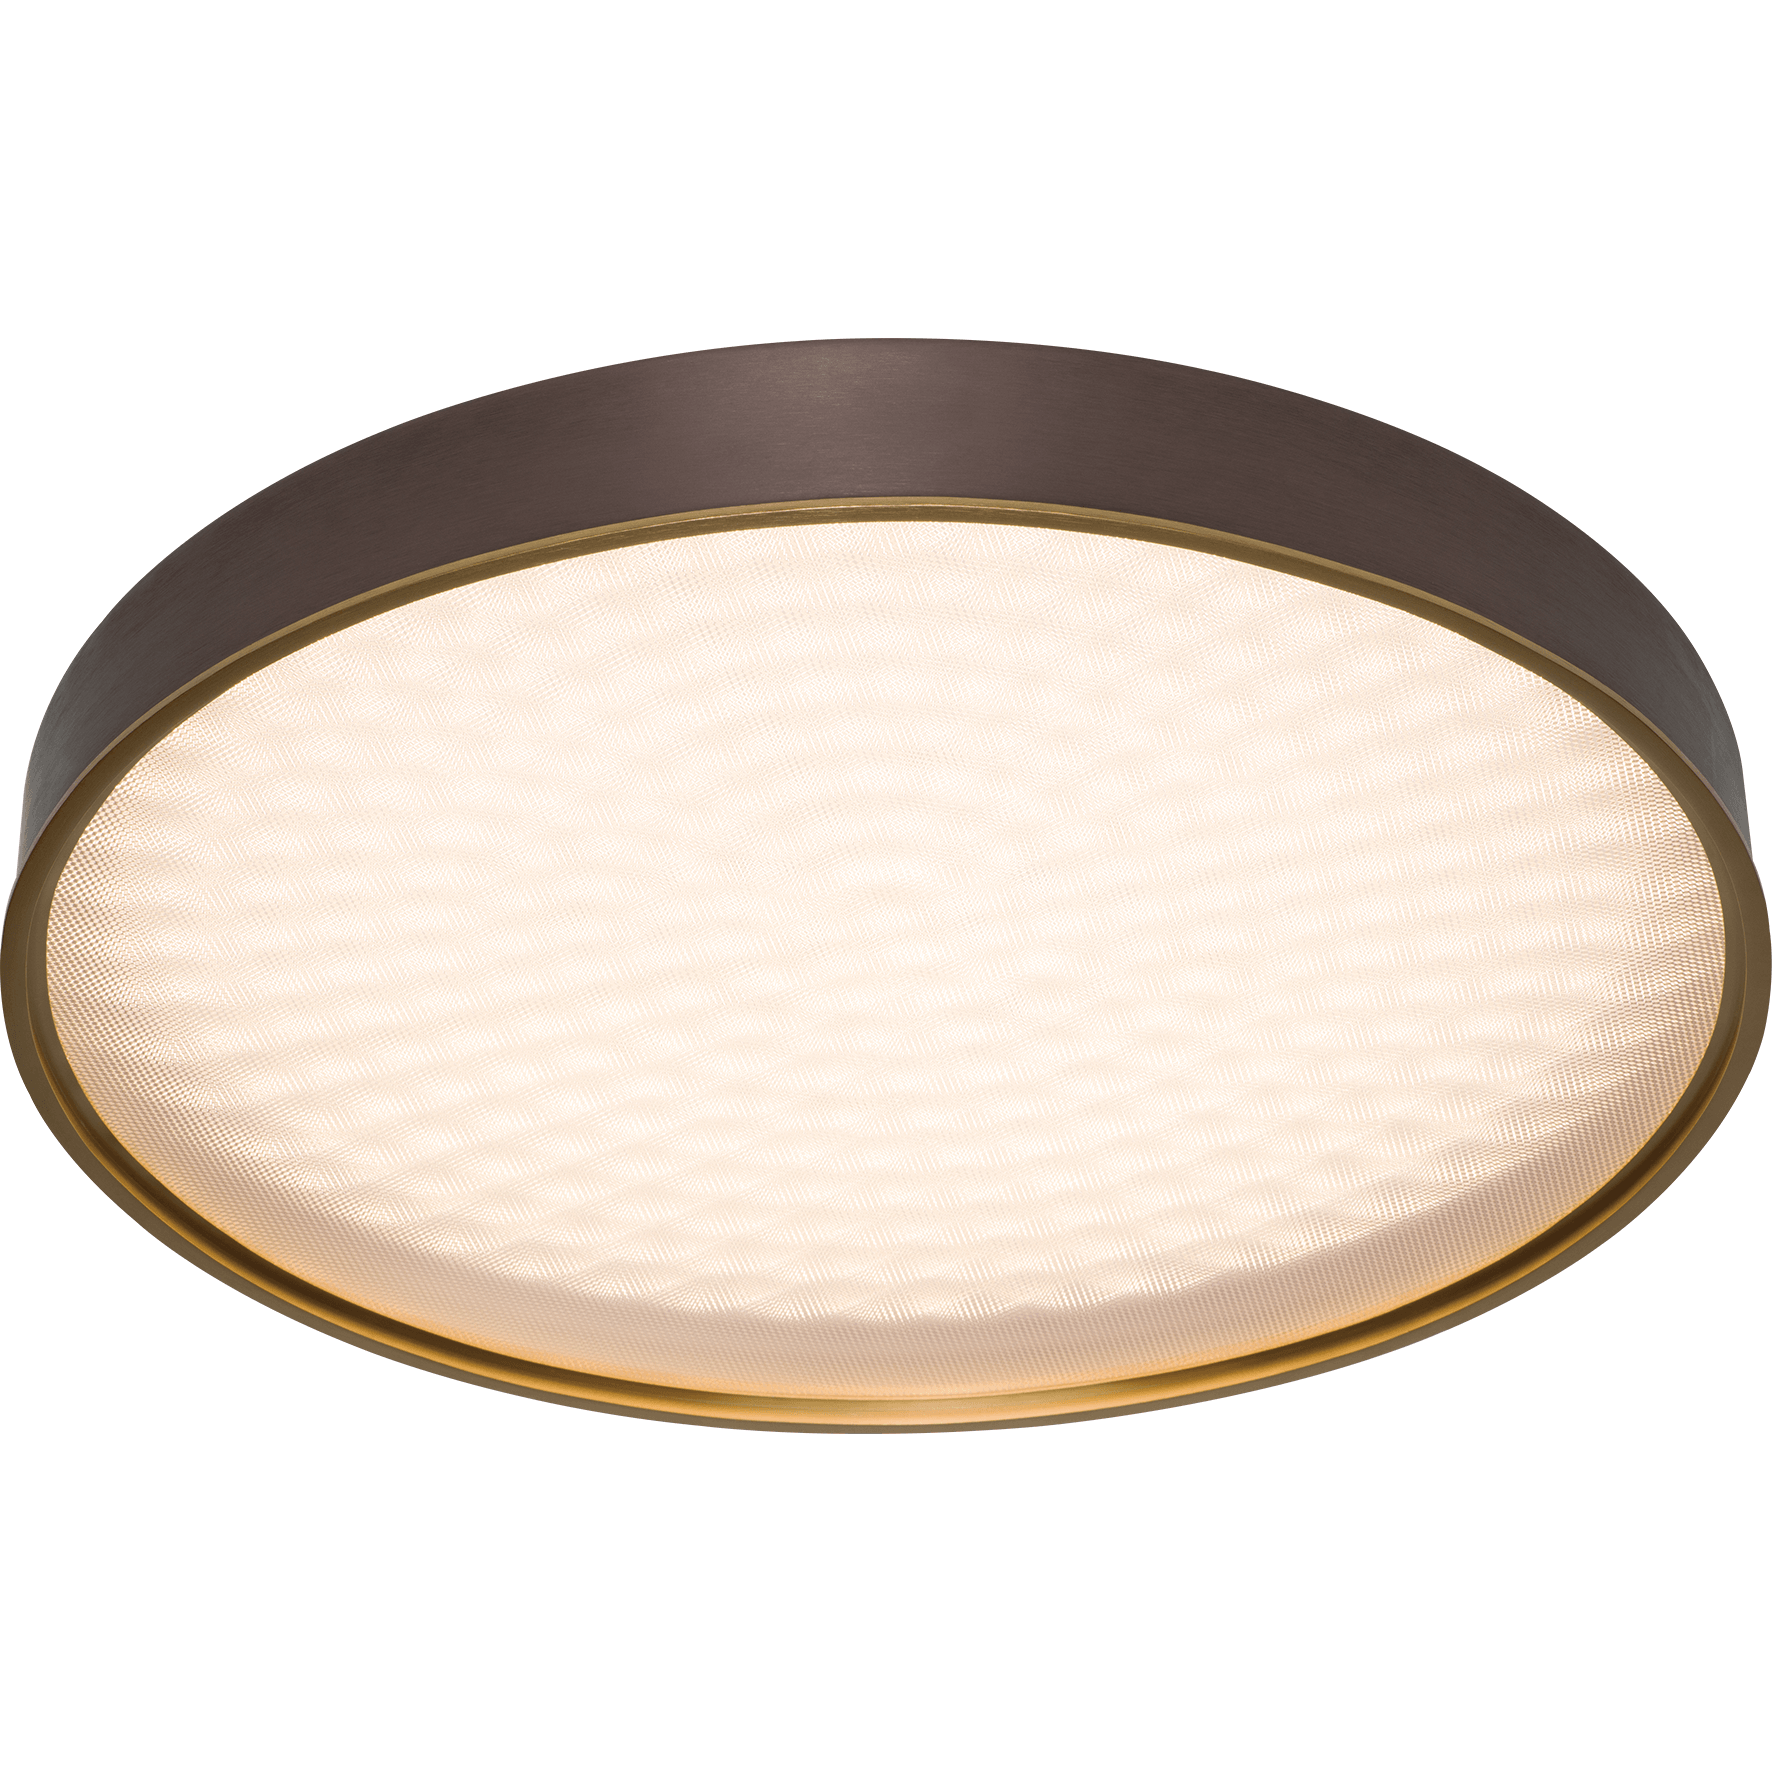 PageOne - Pan Round Large Flush Mount - Lights Canada